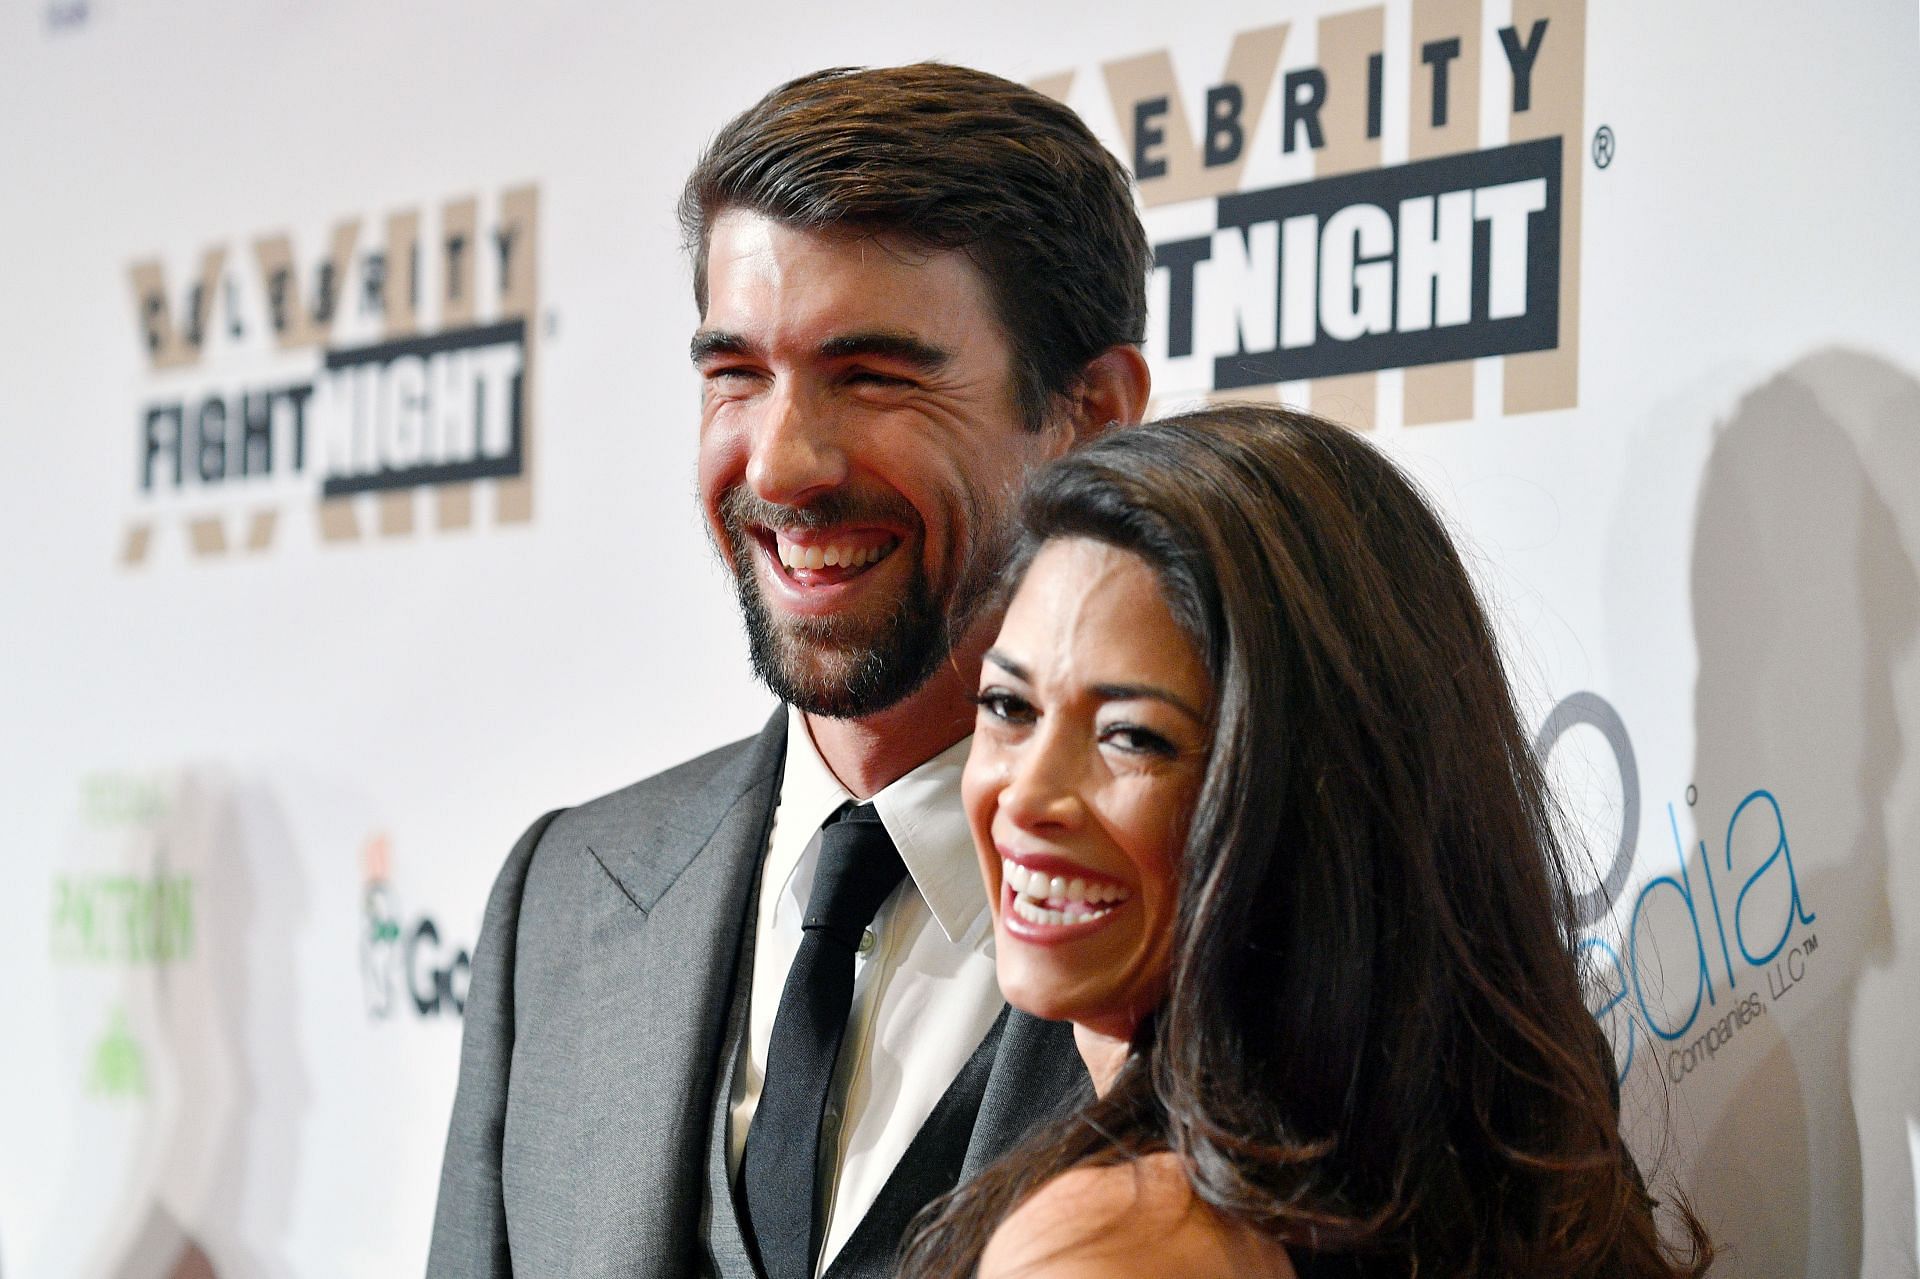 Michael Phelps and Nicole Phelps at Muhammad Ali&#039;s Celebrity Fight Night XXIII - Red Carpet